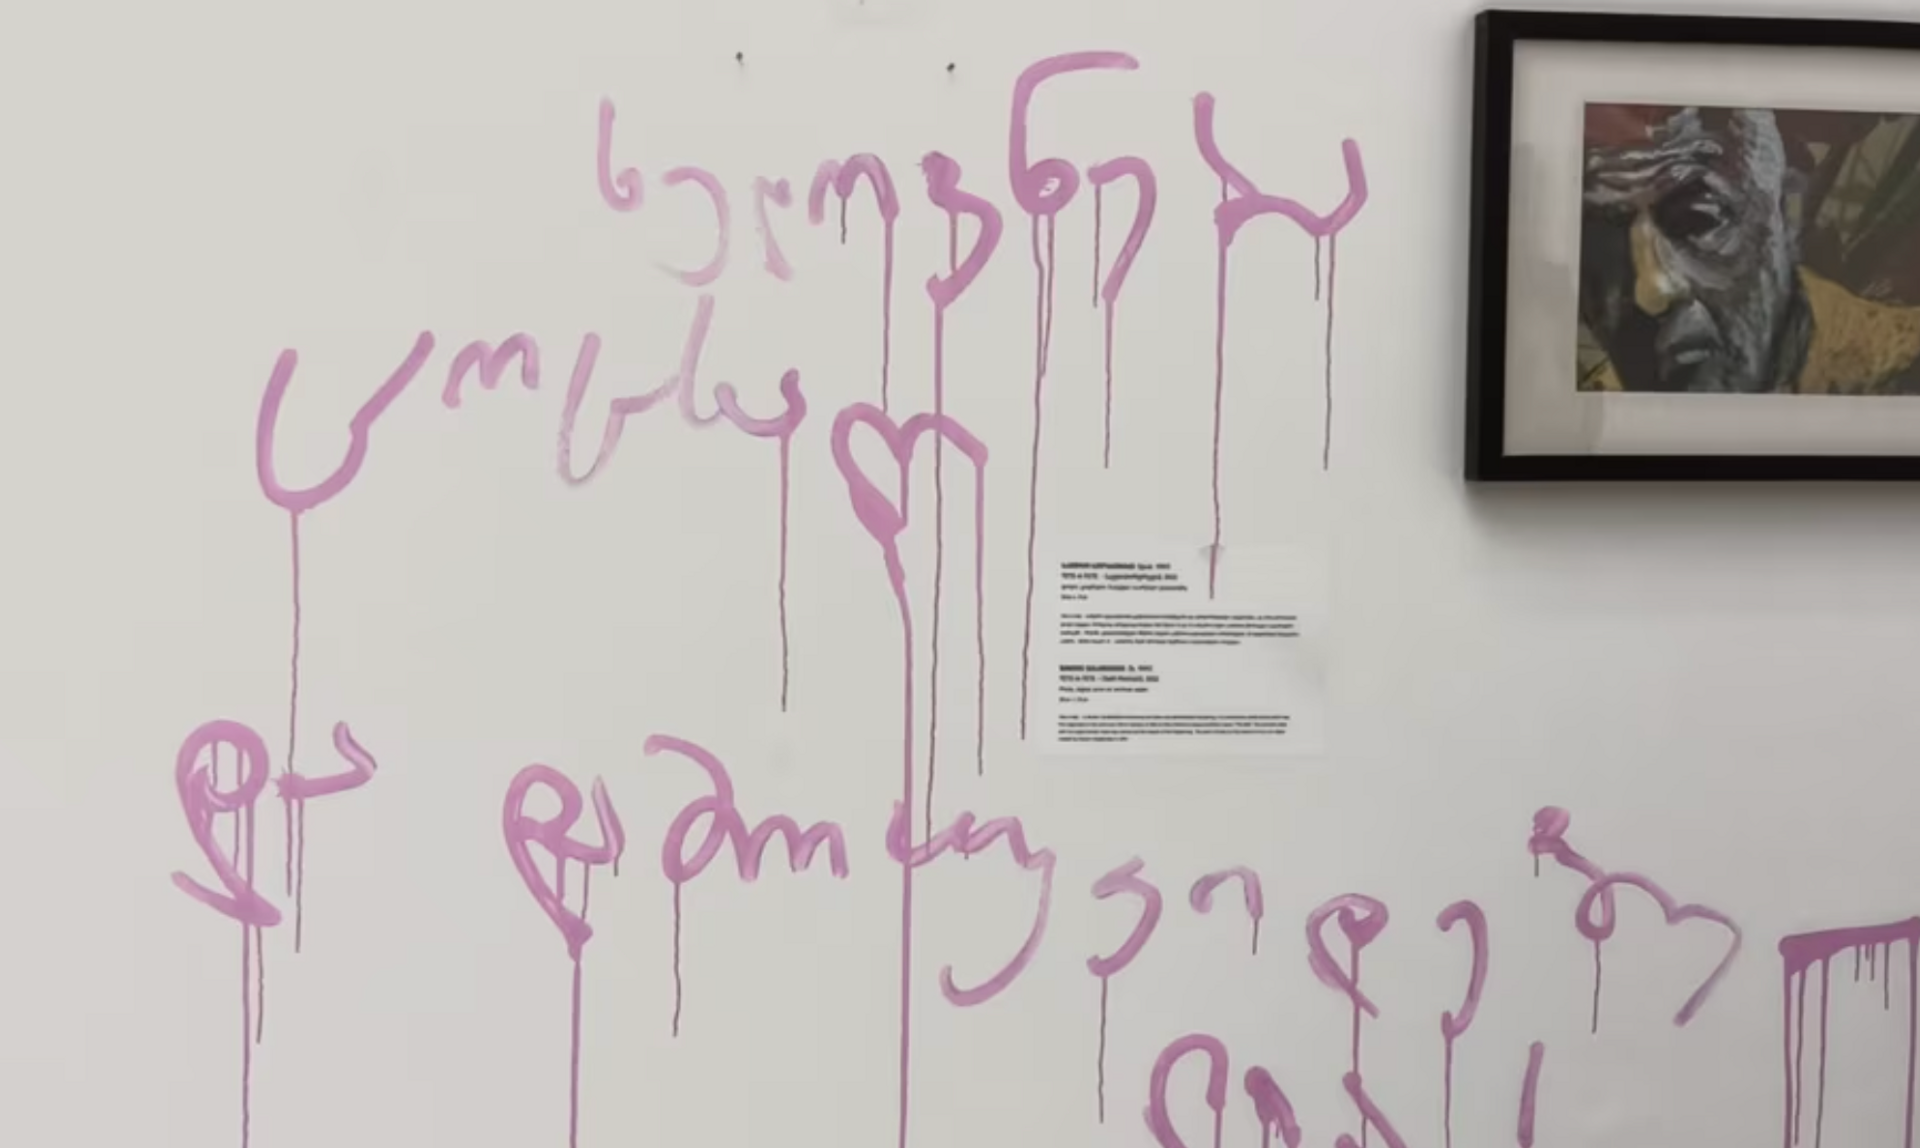 On 4 February, the Georgian artist Sandro Sulaberidze removed his painting Self-Portrait by the Mirror from an exhibition in the National Gallery of Georgia in Tbilisi and spray-painted the words "art is alive and independent" on the gallery's walls